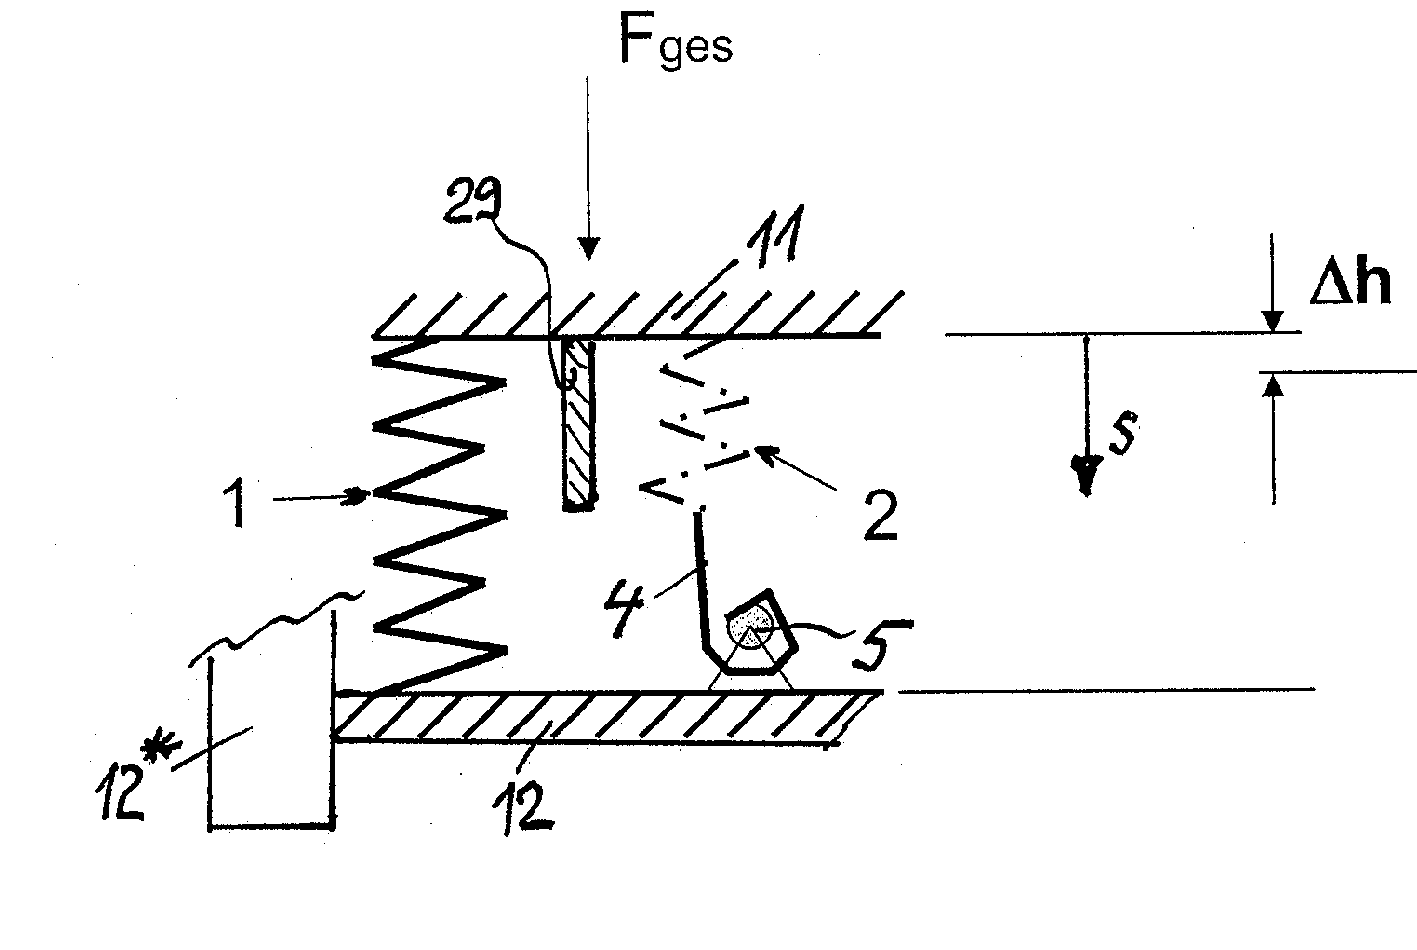 Spring System for a Vehicle Wheel Suspension System